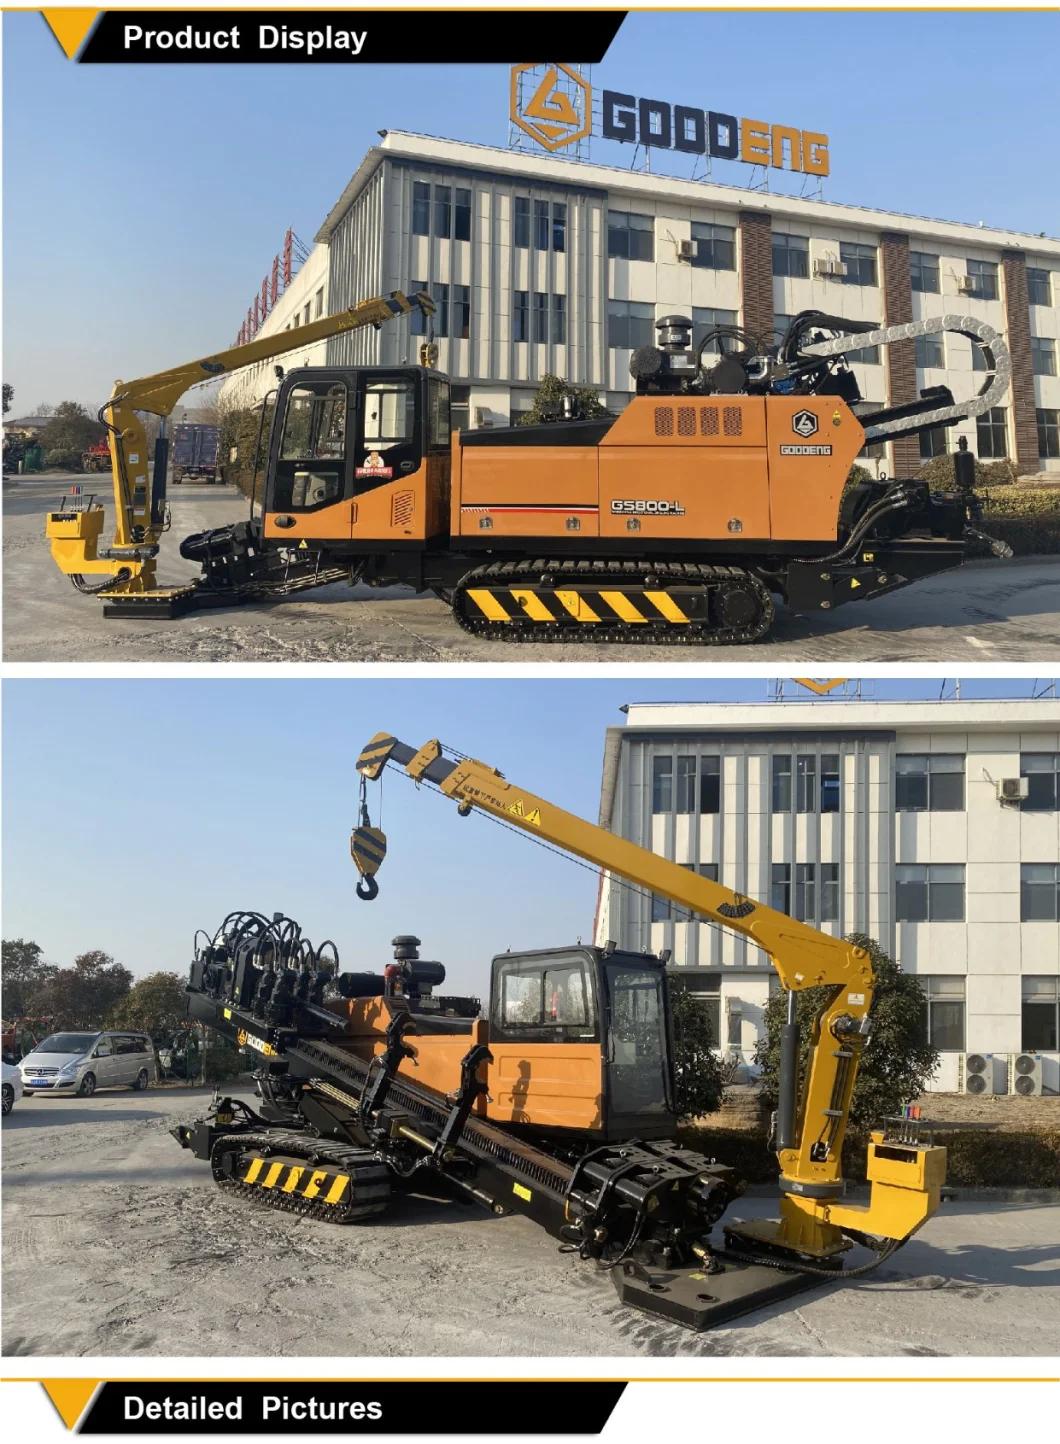 GS800-L/LS Goodeng Horizontal directional drilling rig with high quality